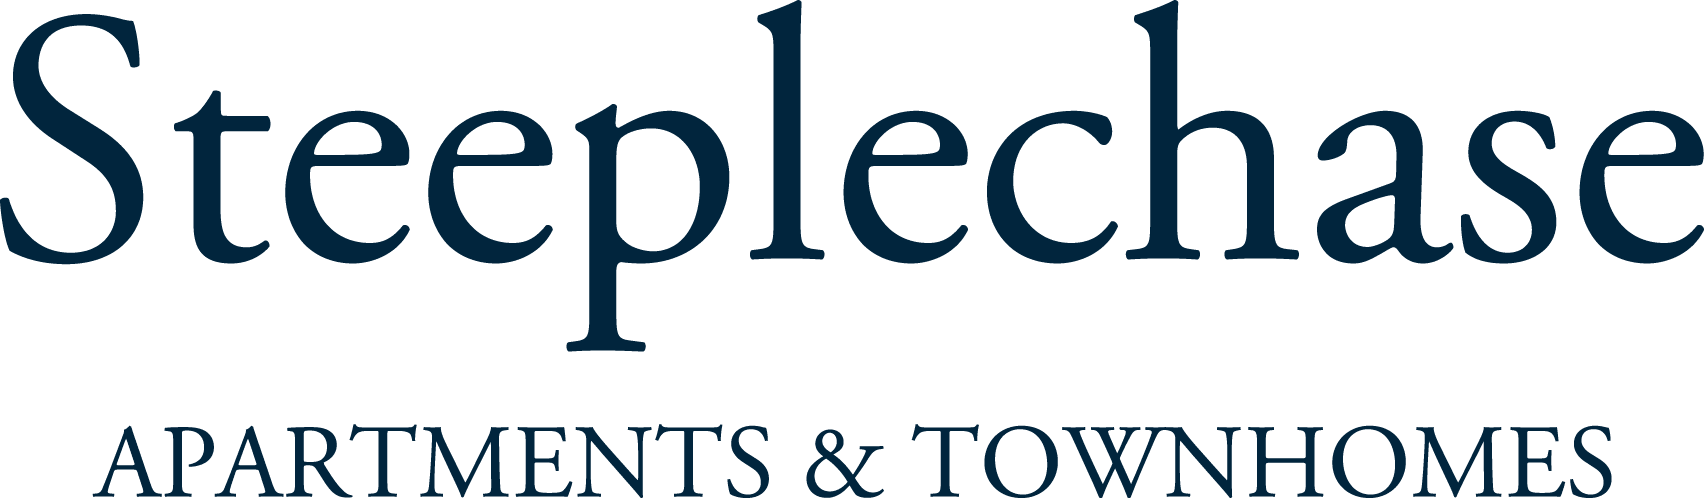 Steeplechase Apartments & Townhomes